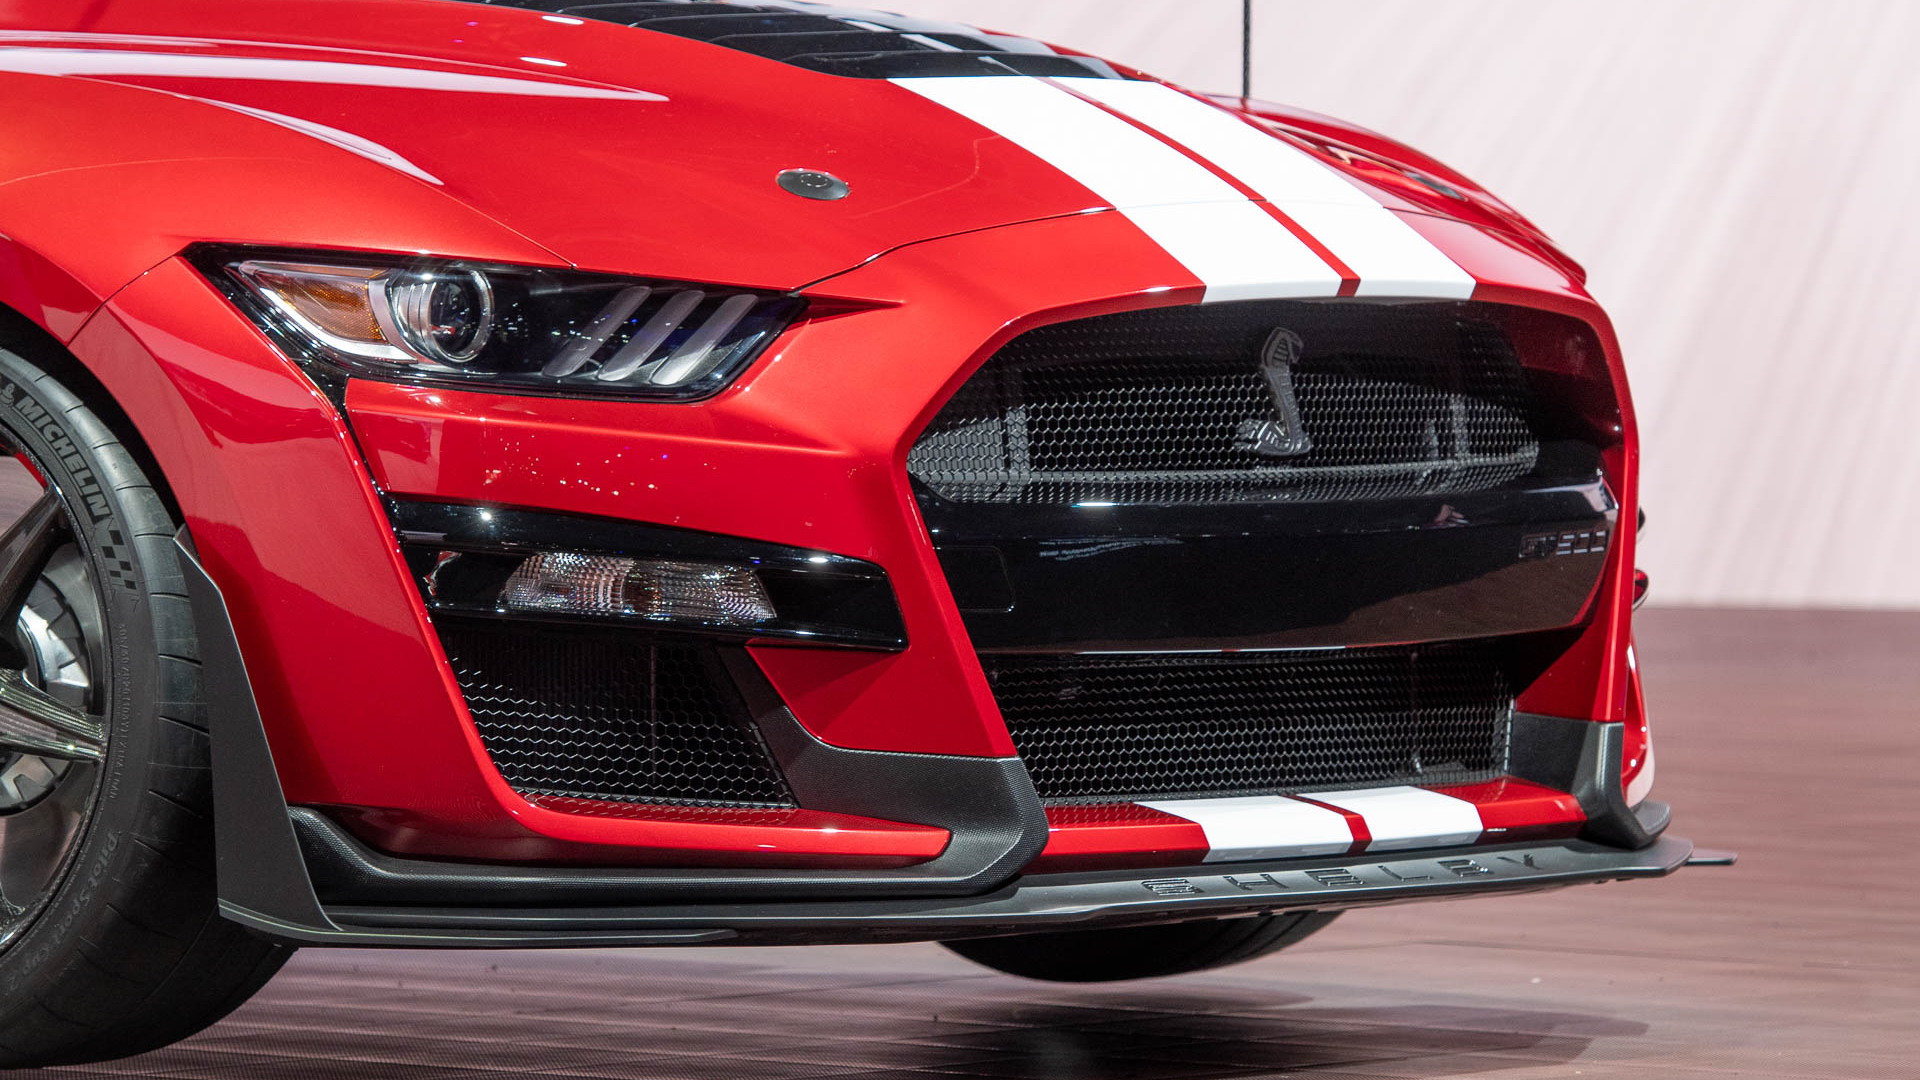 2020 Ford Mustang Shelby GT500, 2019 Detroit auto show